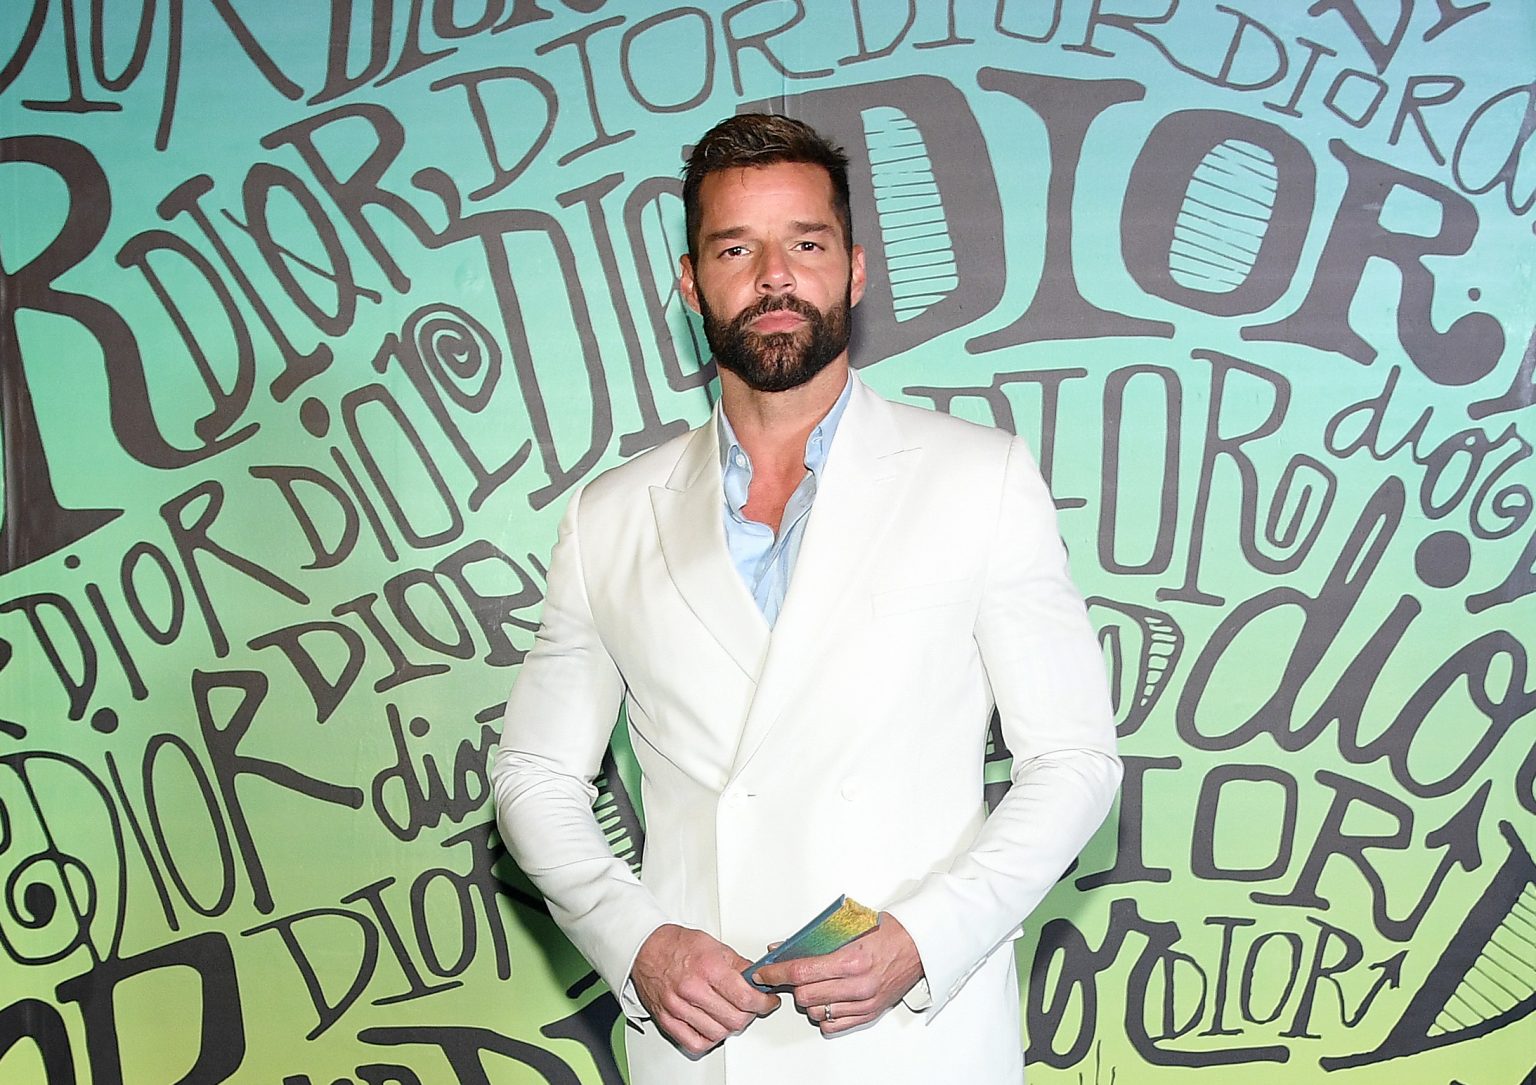 Ricky Martin Puerto Rico Protests Over Lack of Government Action